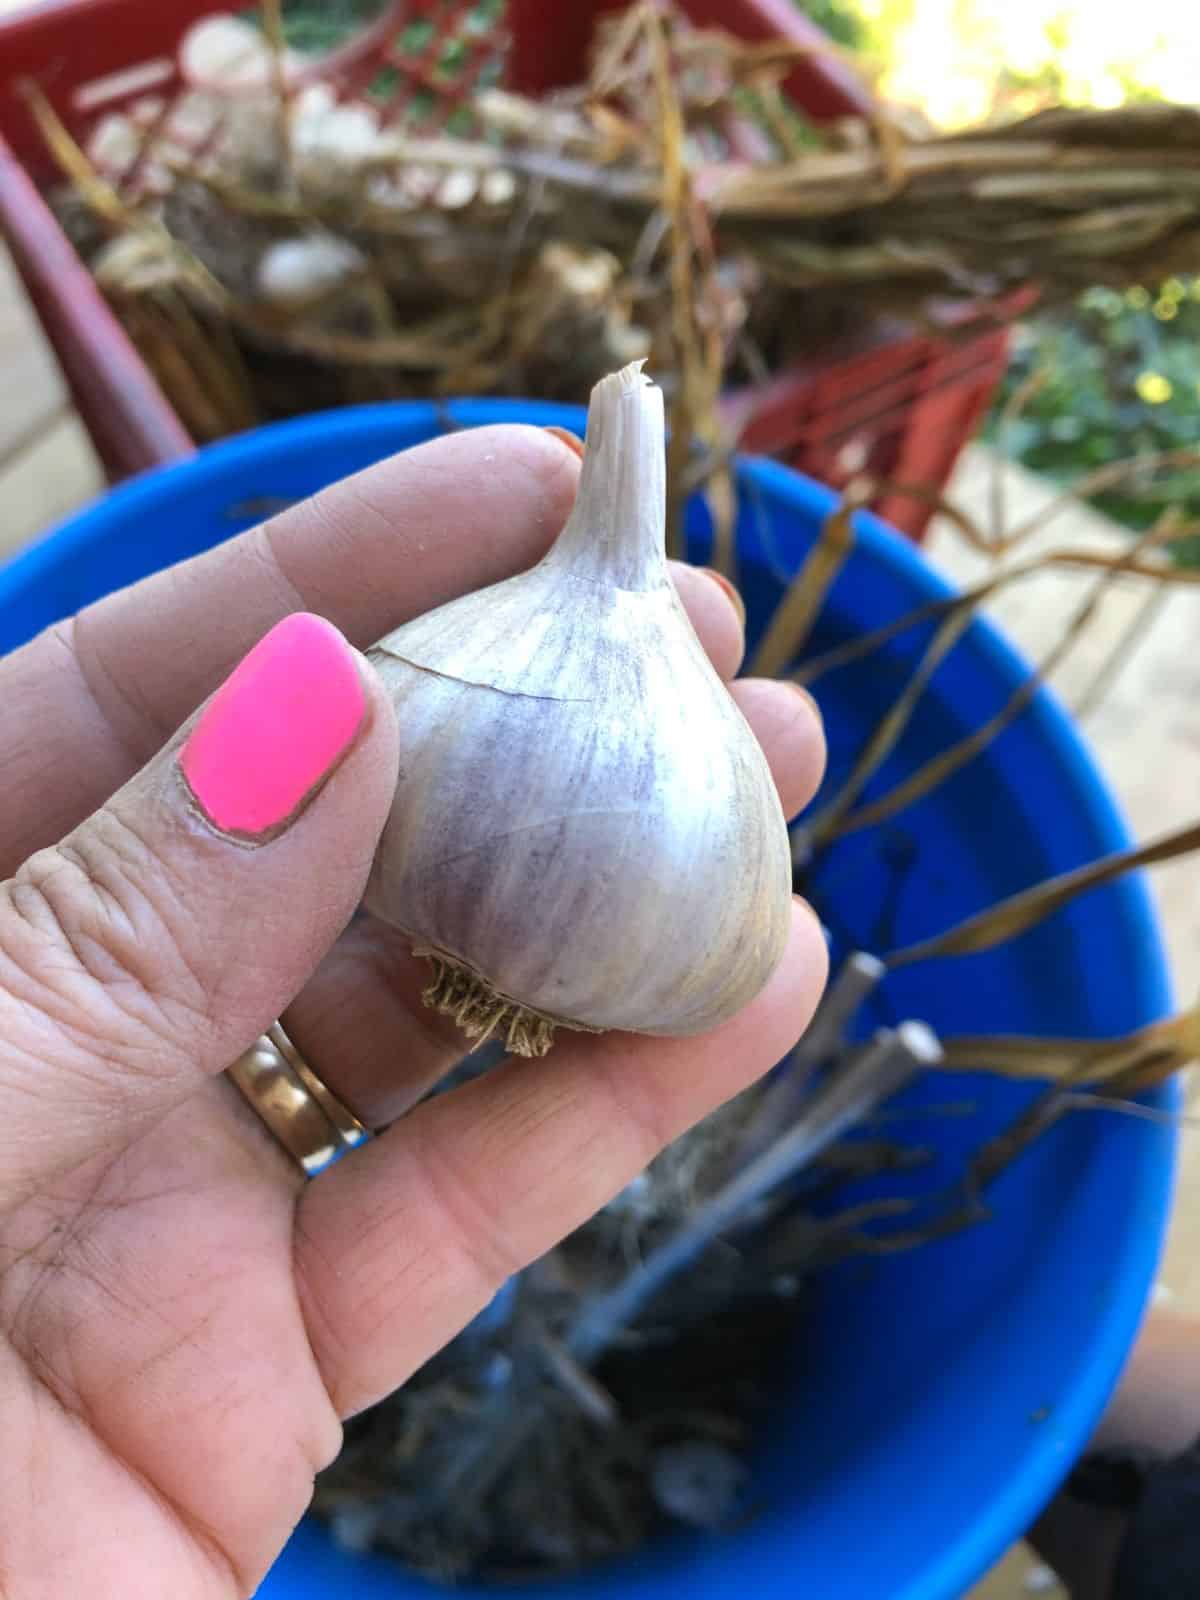 Inspecting a head of garlic for planting